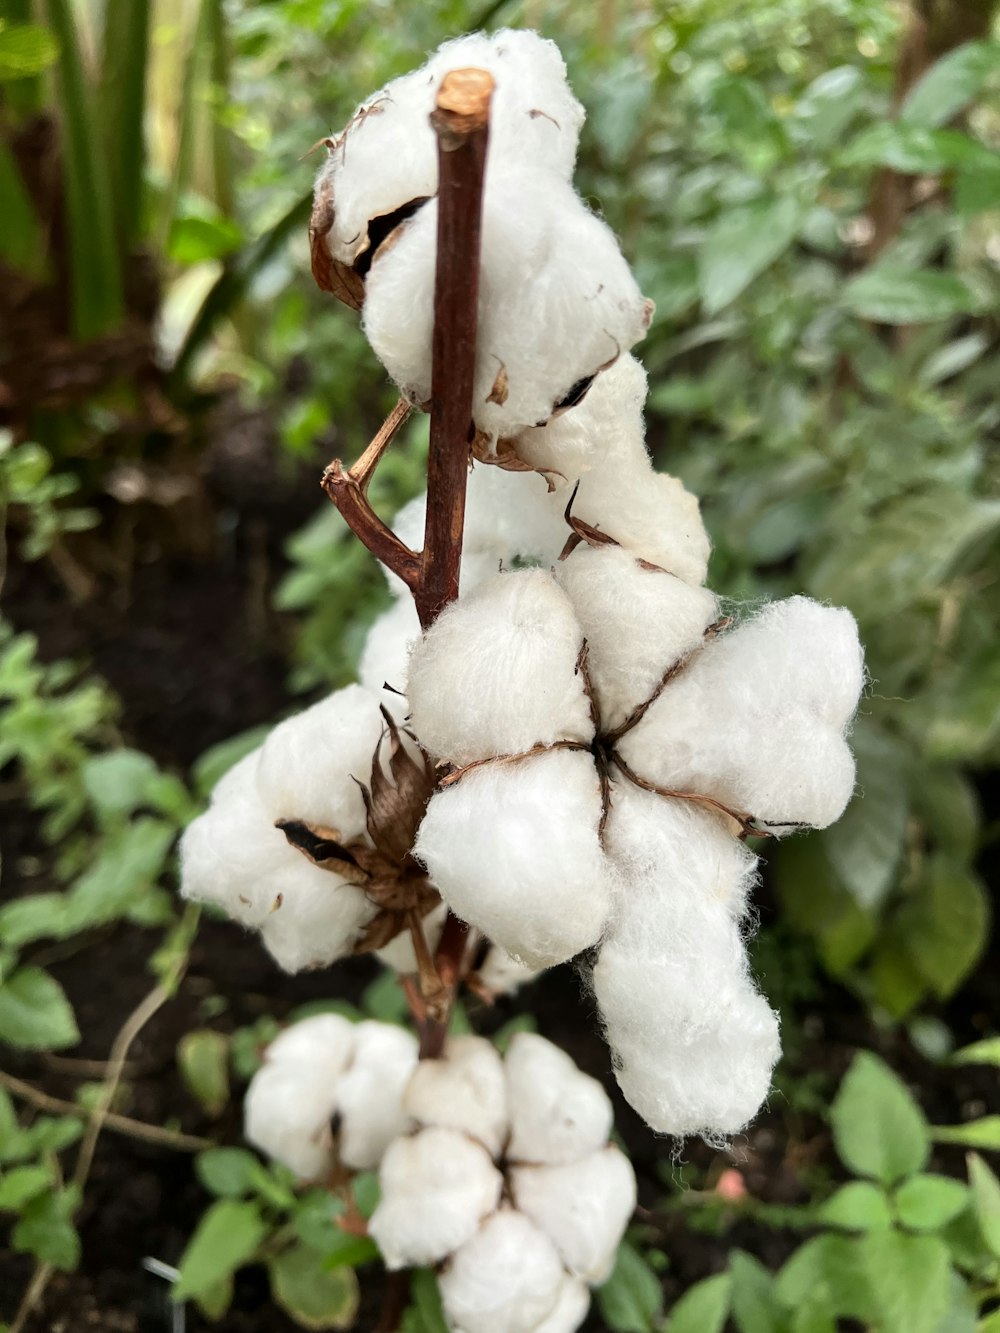 a close up of a cotton plant in a garden